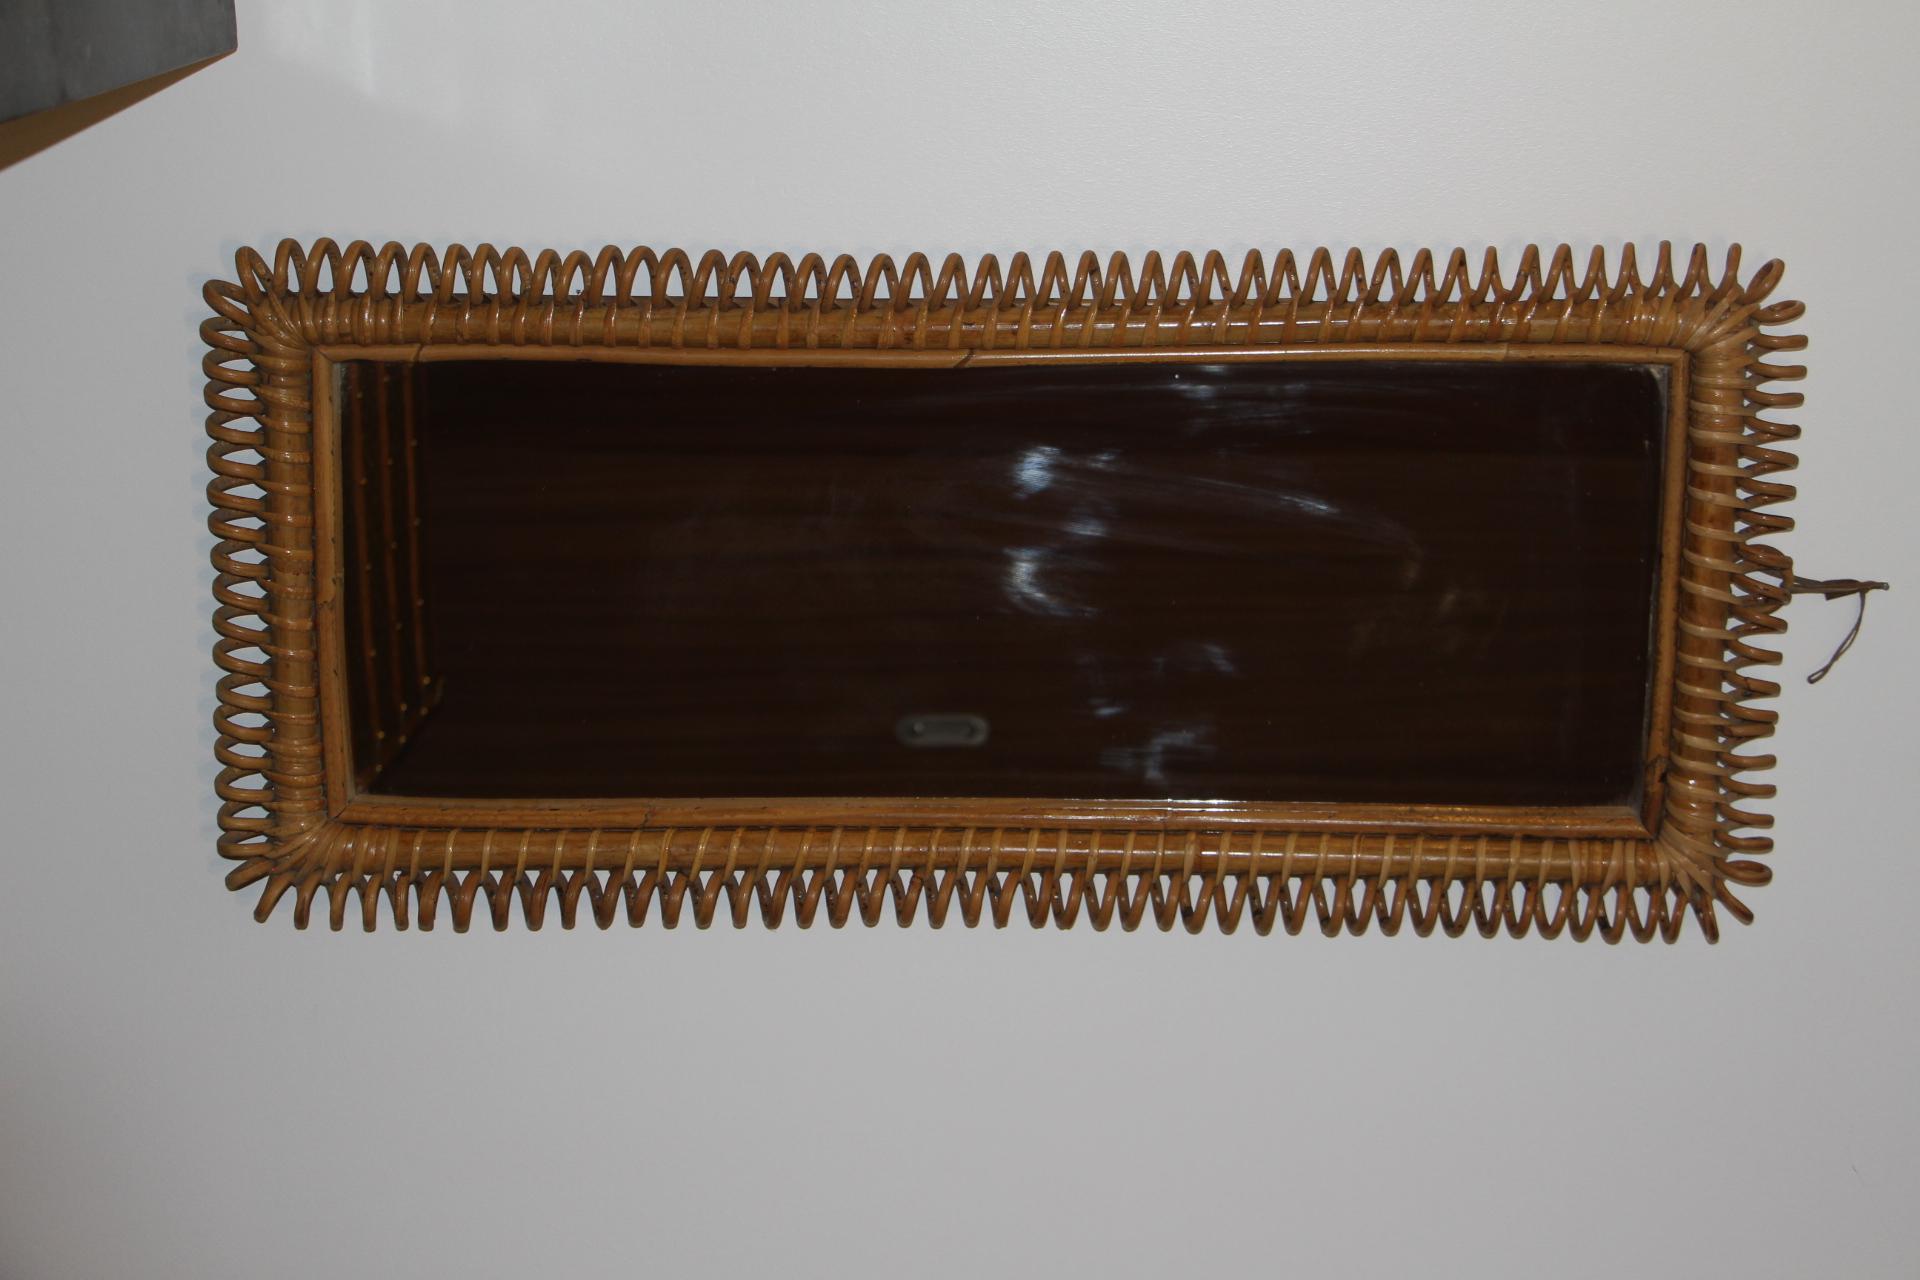 This very decorative mirror was made in Italy in 1960’s .It is typical of this period design and is all original.It was handcrafted and is in perfect condition. It has got a beautiful and very unusual rectangular shape, full of charm.
It could be